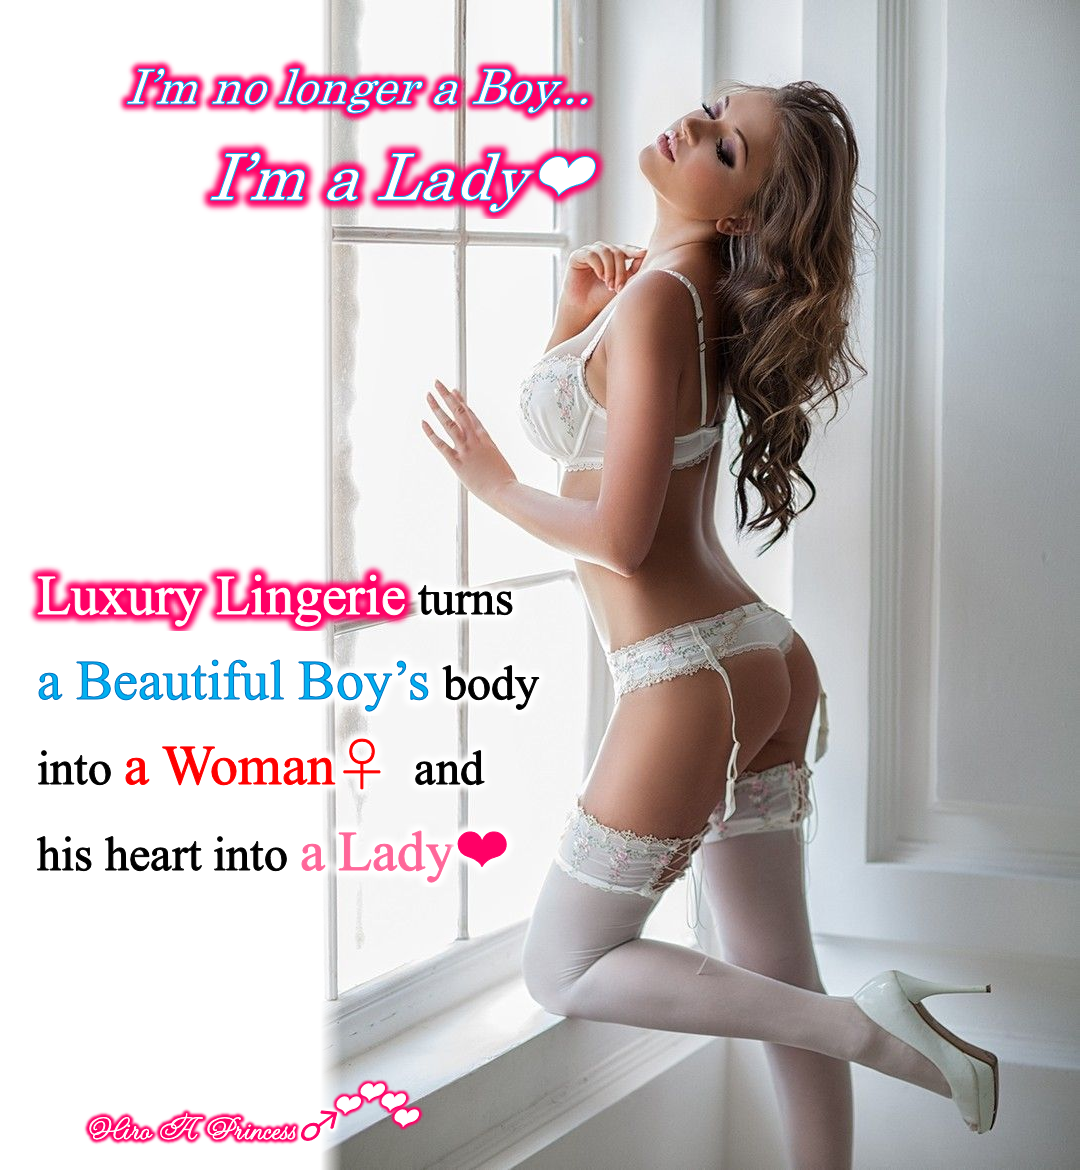 Luxury Lingerie turns a Beautiful Boy’s body into a Woman♀ and his heart into a Lady E